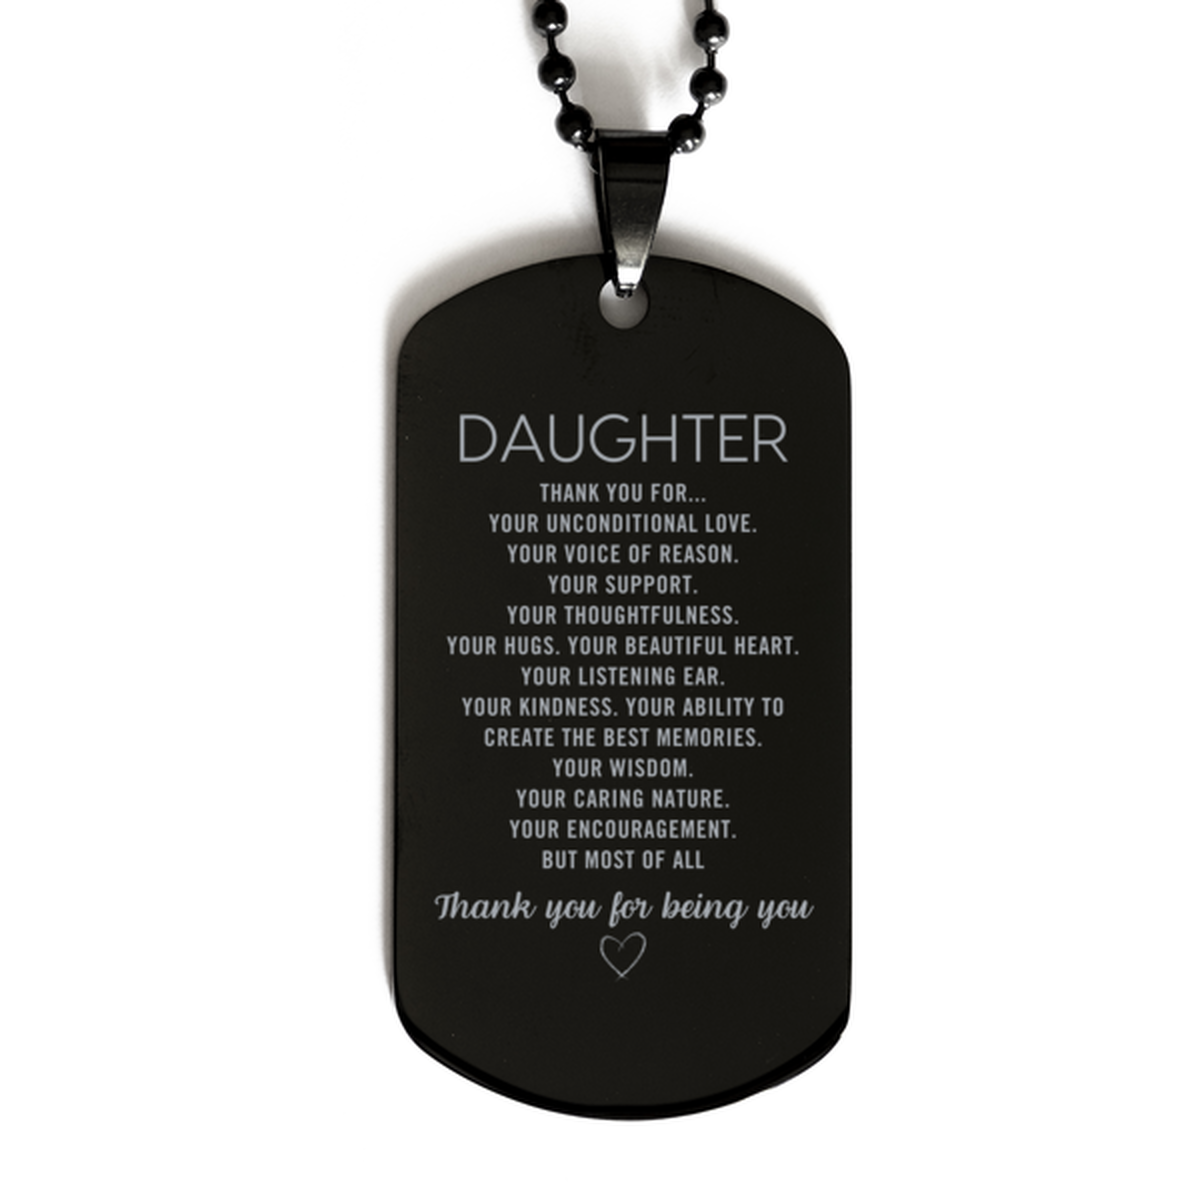 Daughter Black Dog Tag Custom, Engraved Gifts For Daughter Christmas Graduation Birthday Gifts for Men Women Daughter Thank you for Your unconditional love